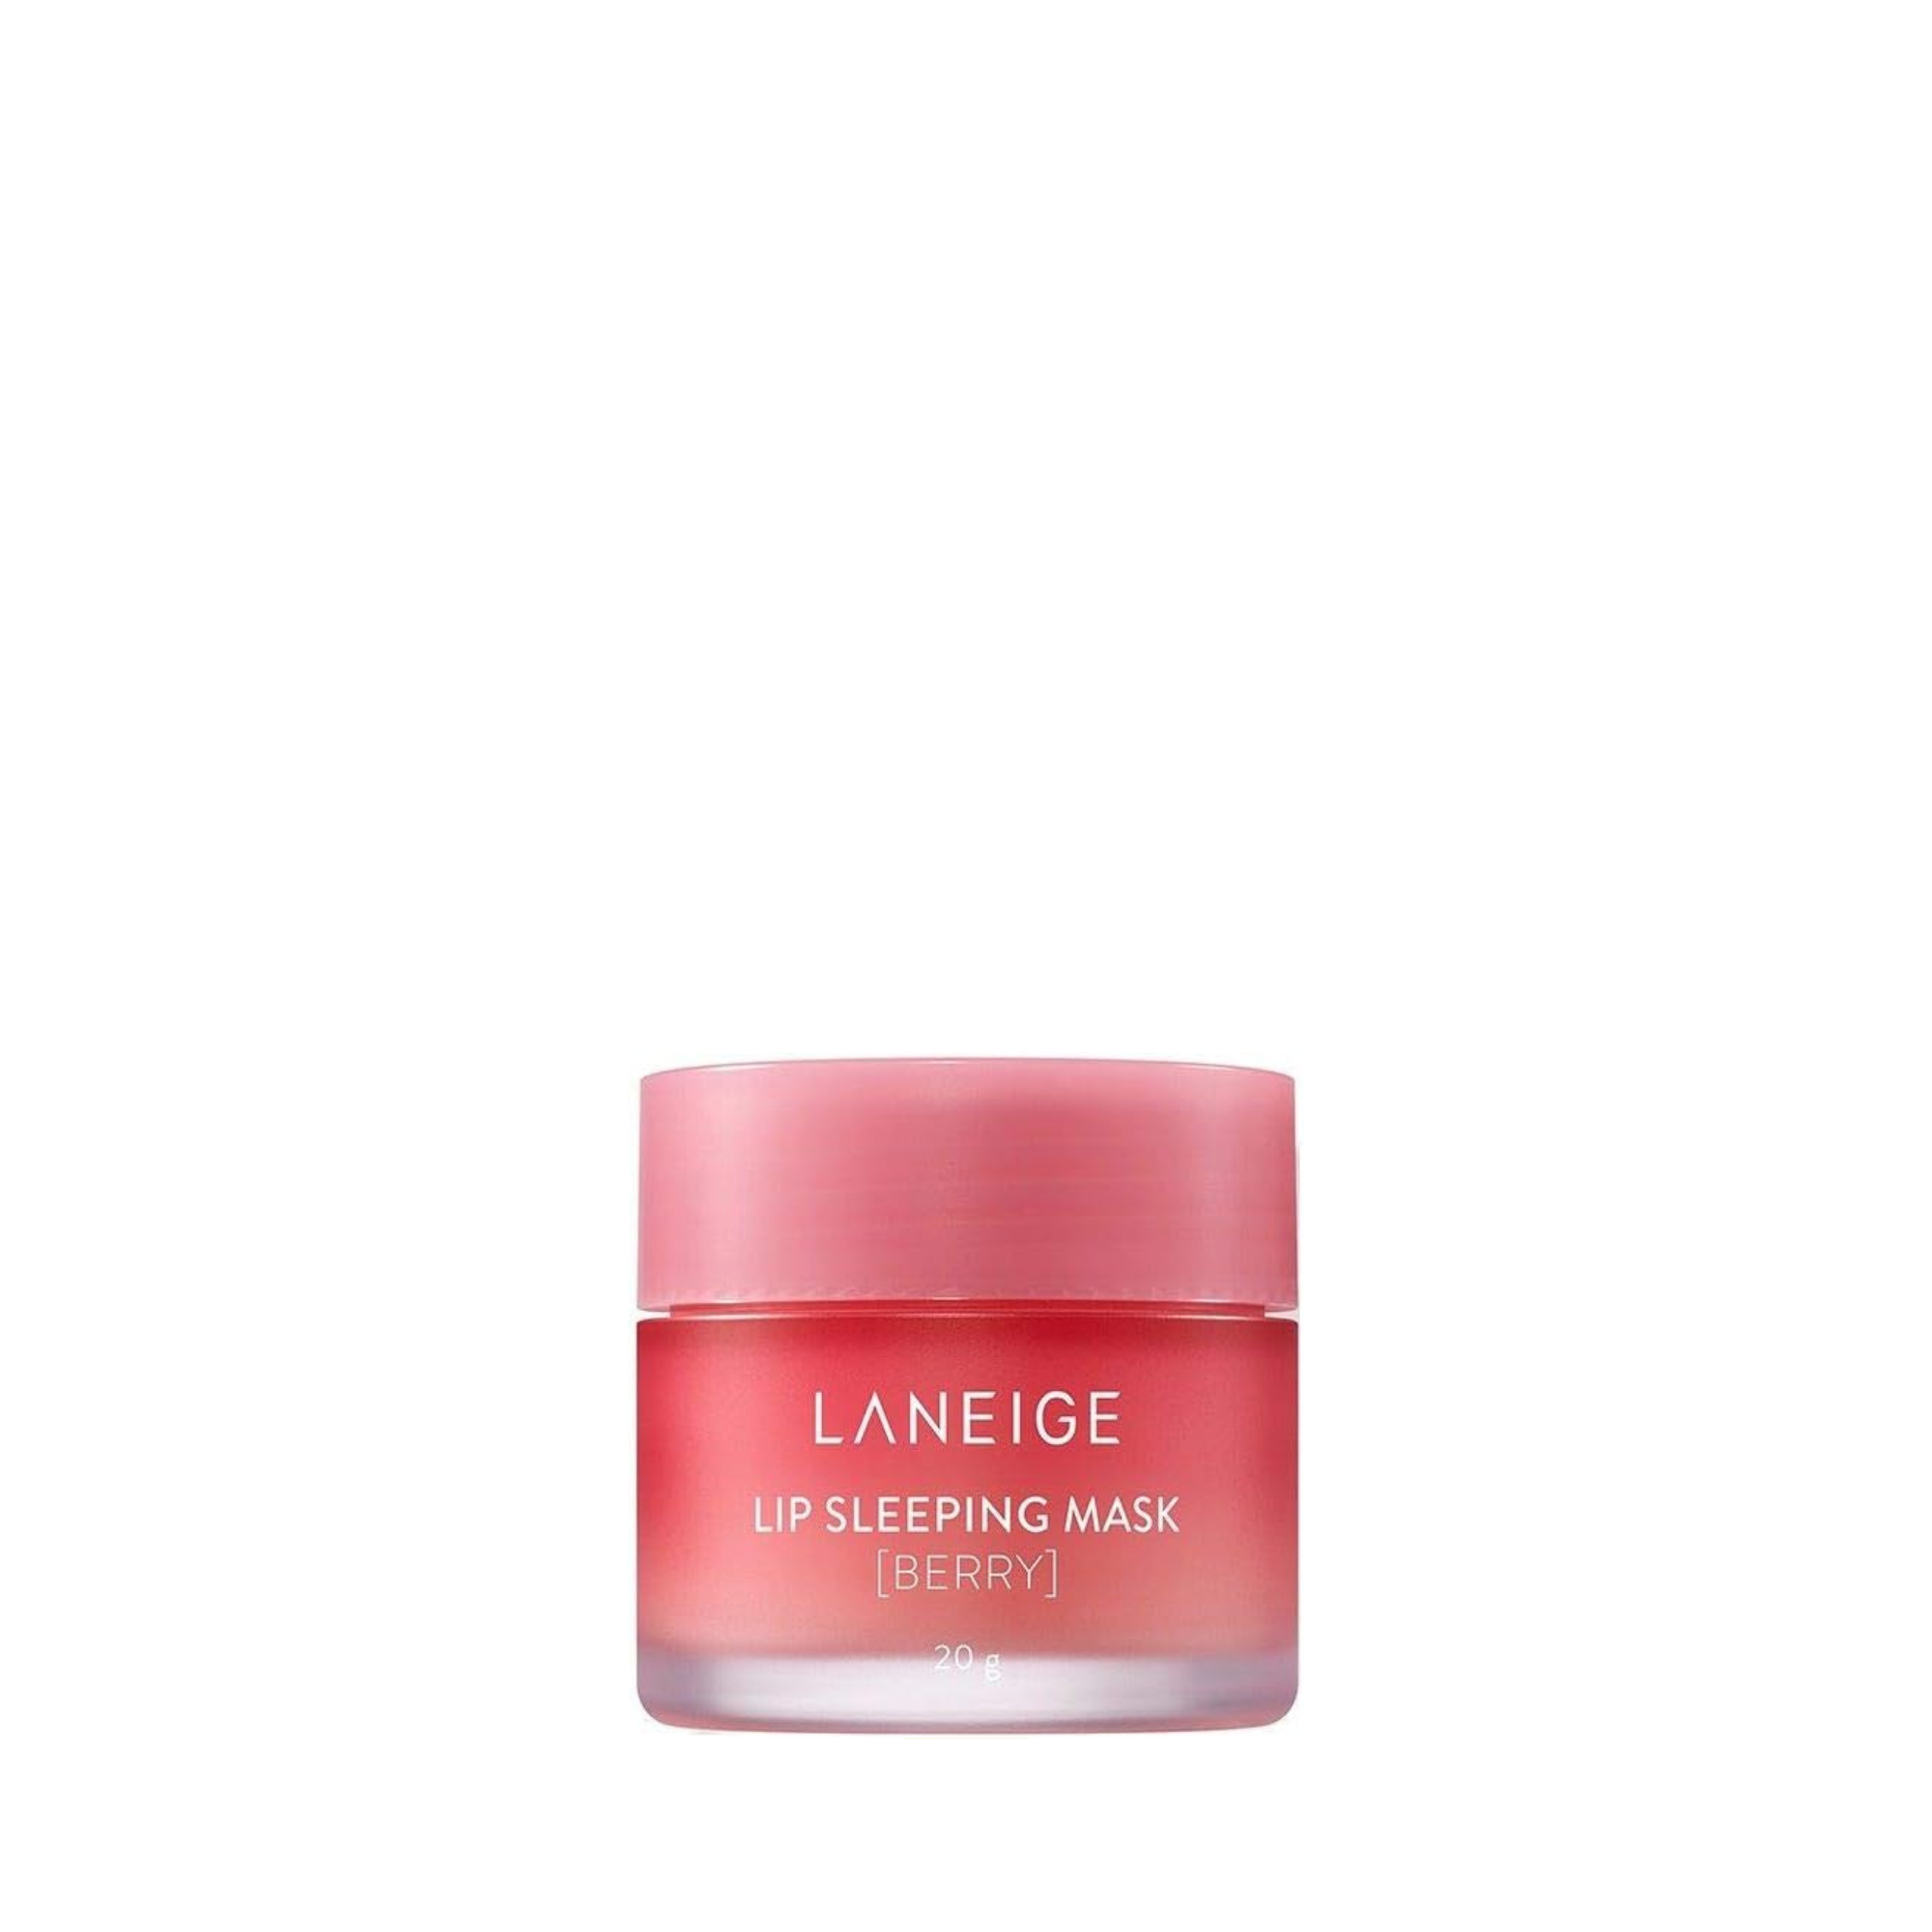 Lip night revitalizing mask with berry flavor by Laneige (Laneige Lip Sleeping Mask Berry)